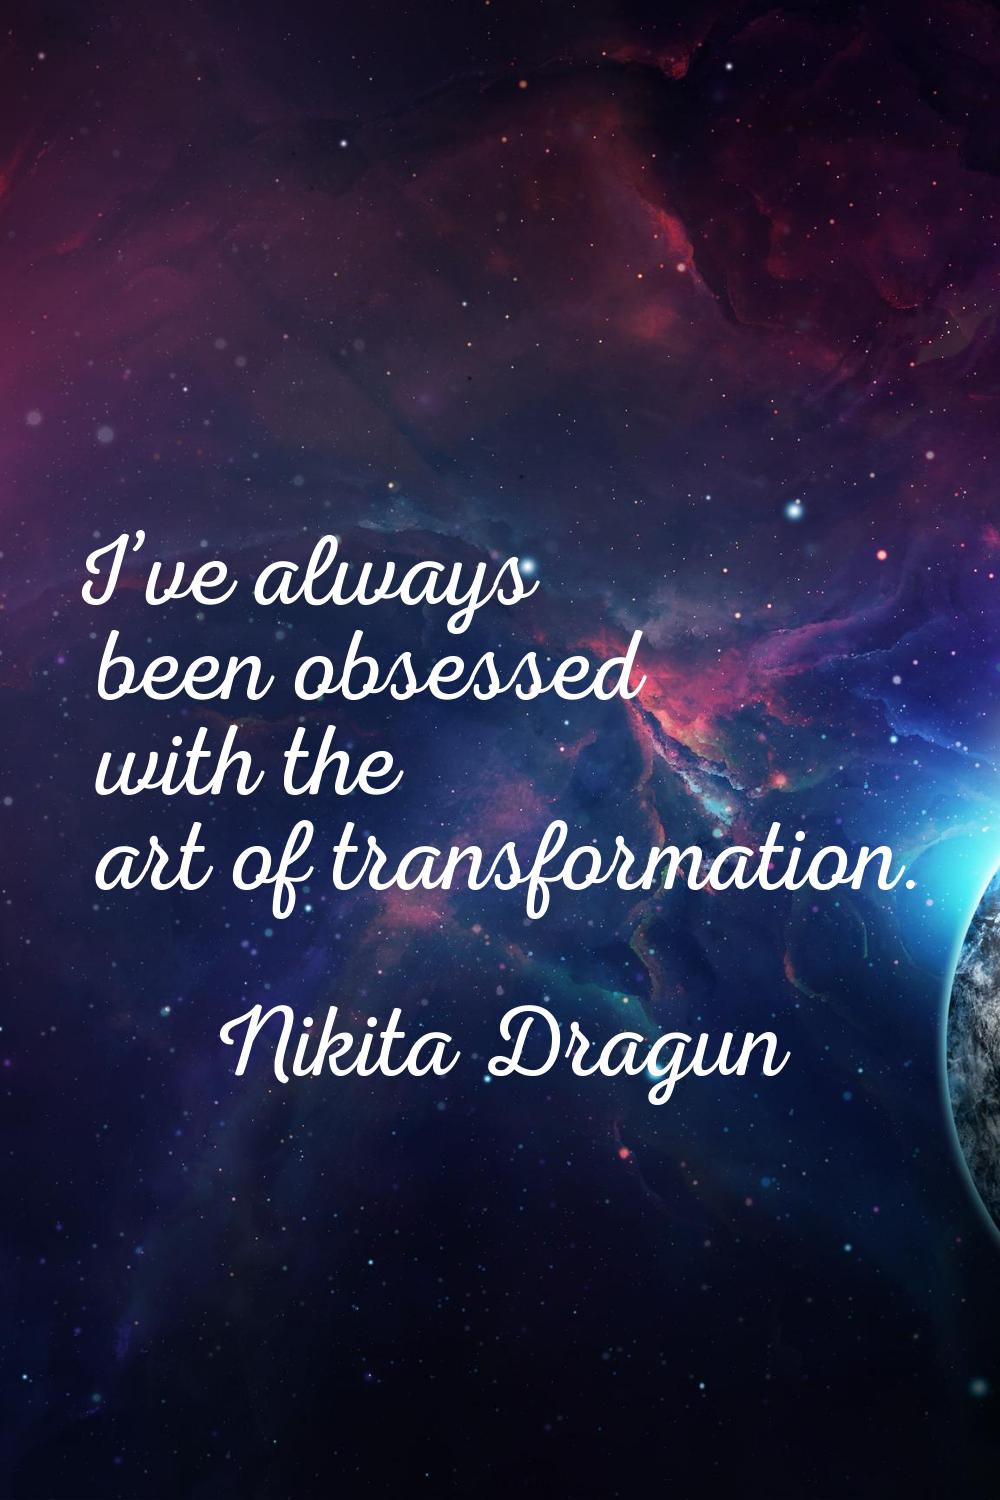 I’ve always been obsessed with the art of transformation.